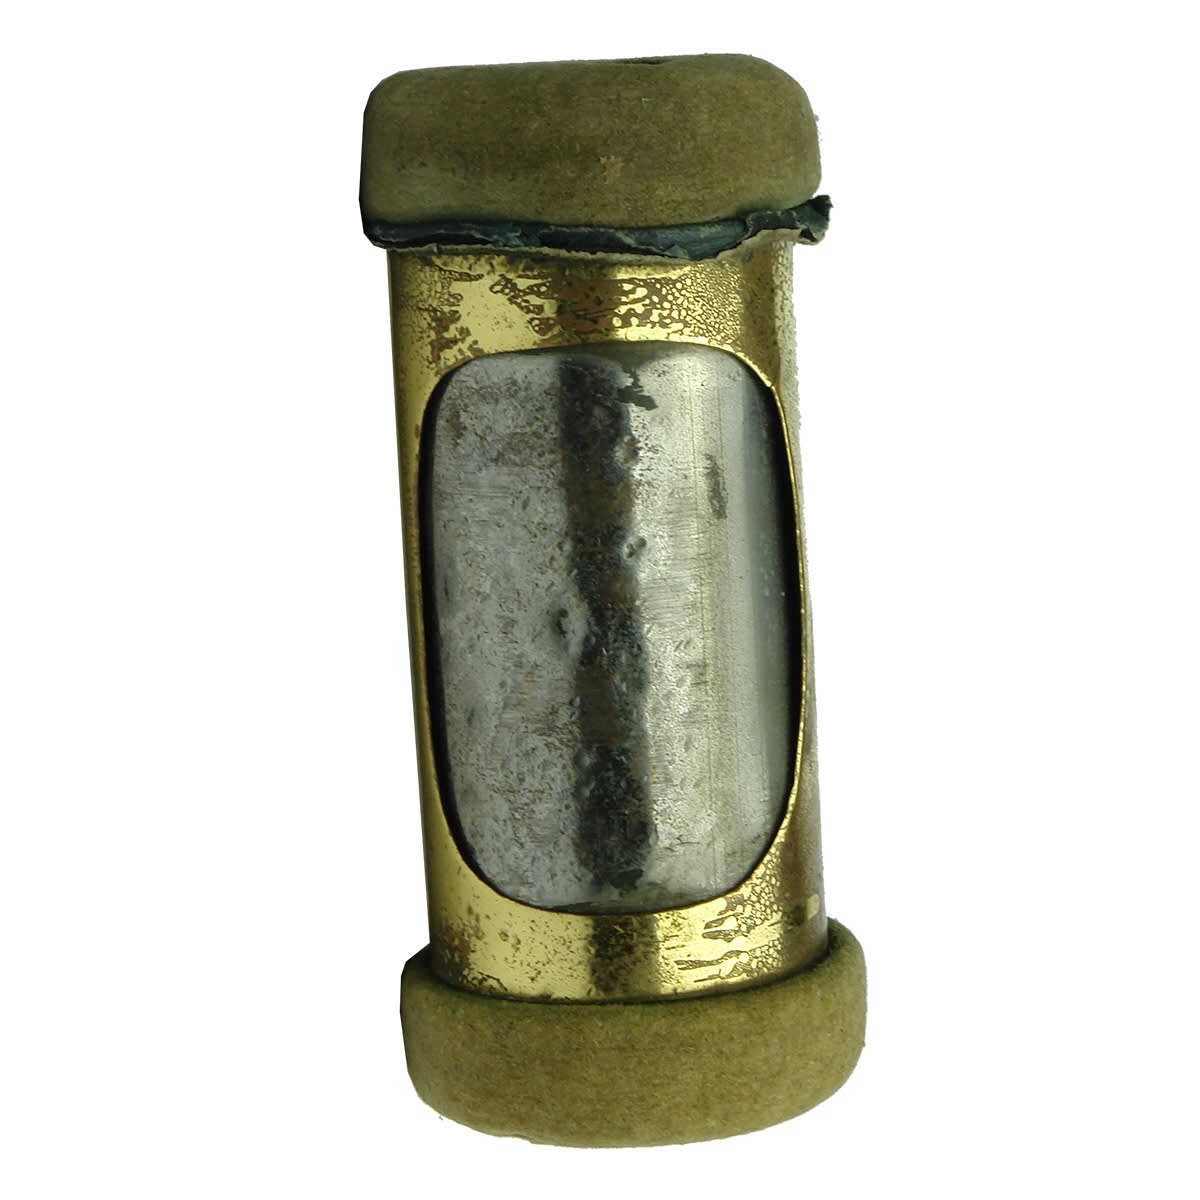 Miscellaneous. Department Store Cash Carrying System Brass Container.